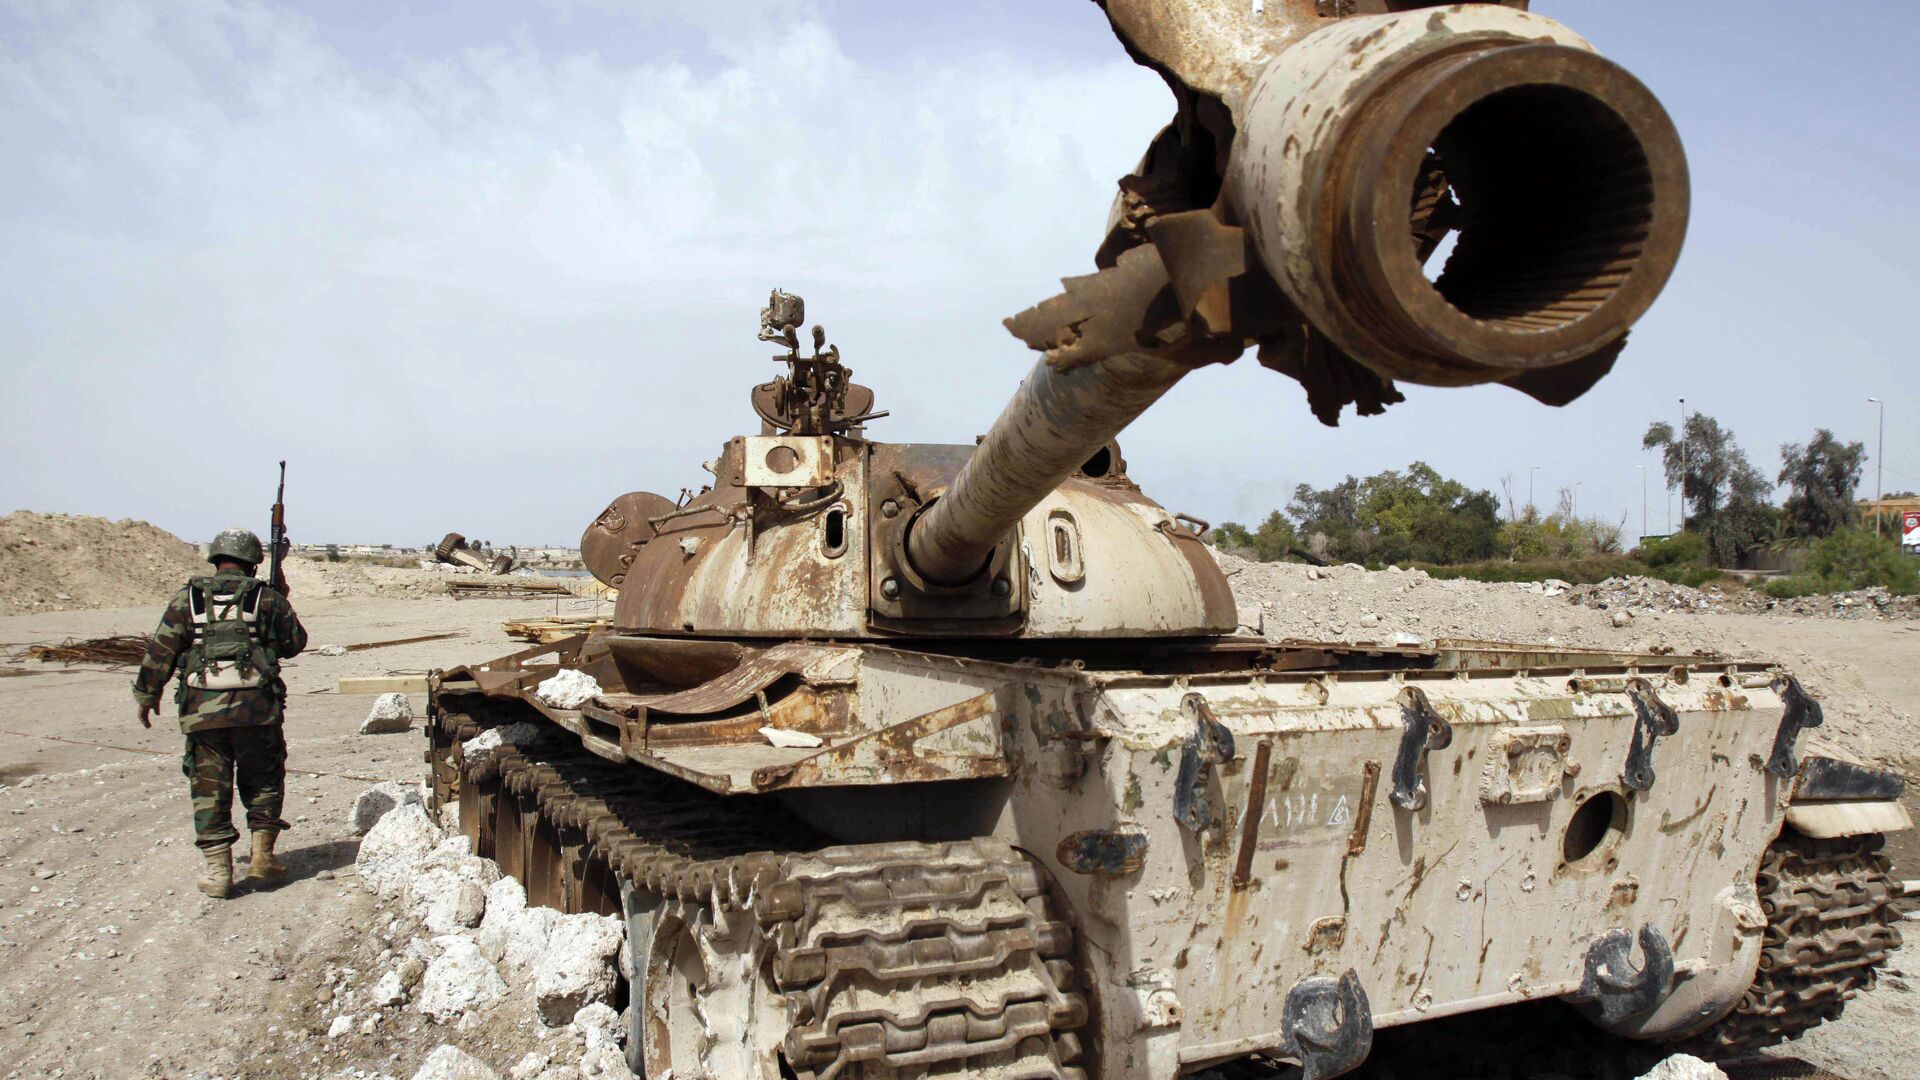 An Iraqi soldier is seen near an Iraqi Army tank, which was destroyed in the US-led invasion, in Basra, Iraq's second-largest city, 550 kilometers (340 miles) southeast of Baghdad, Iraq, Thursday, April 9, 2009 - Sputnik International, 1920, 21.03.2023